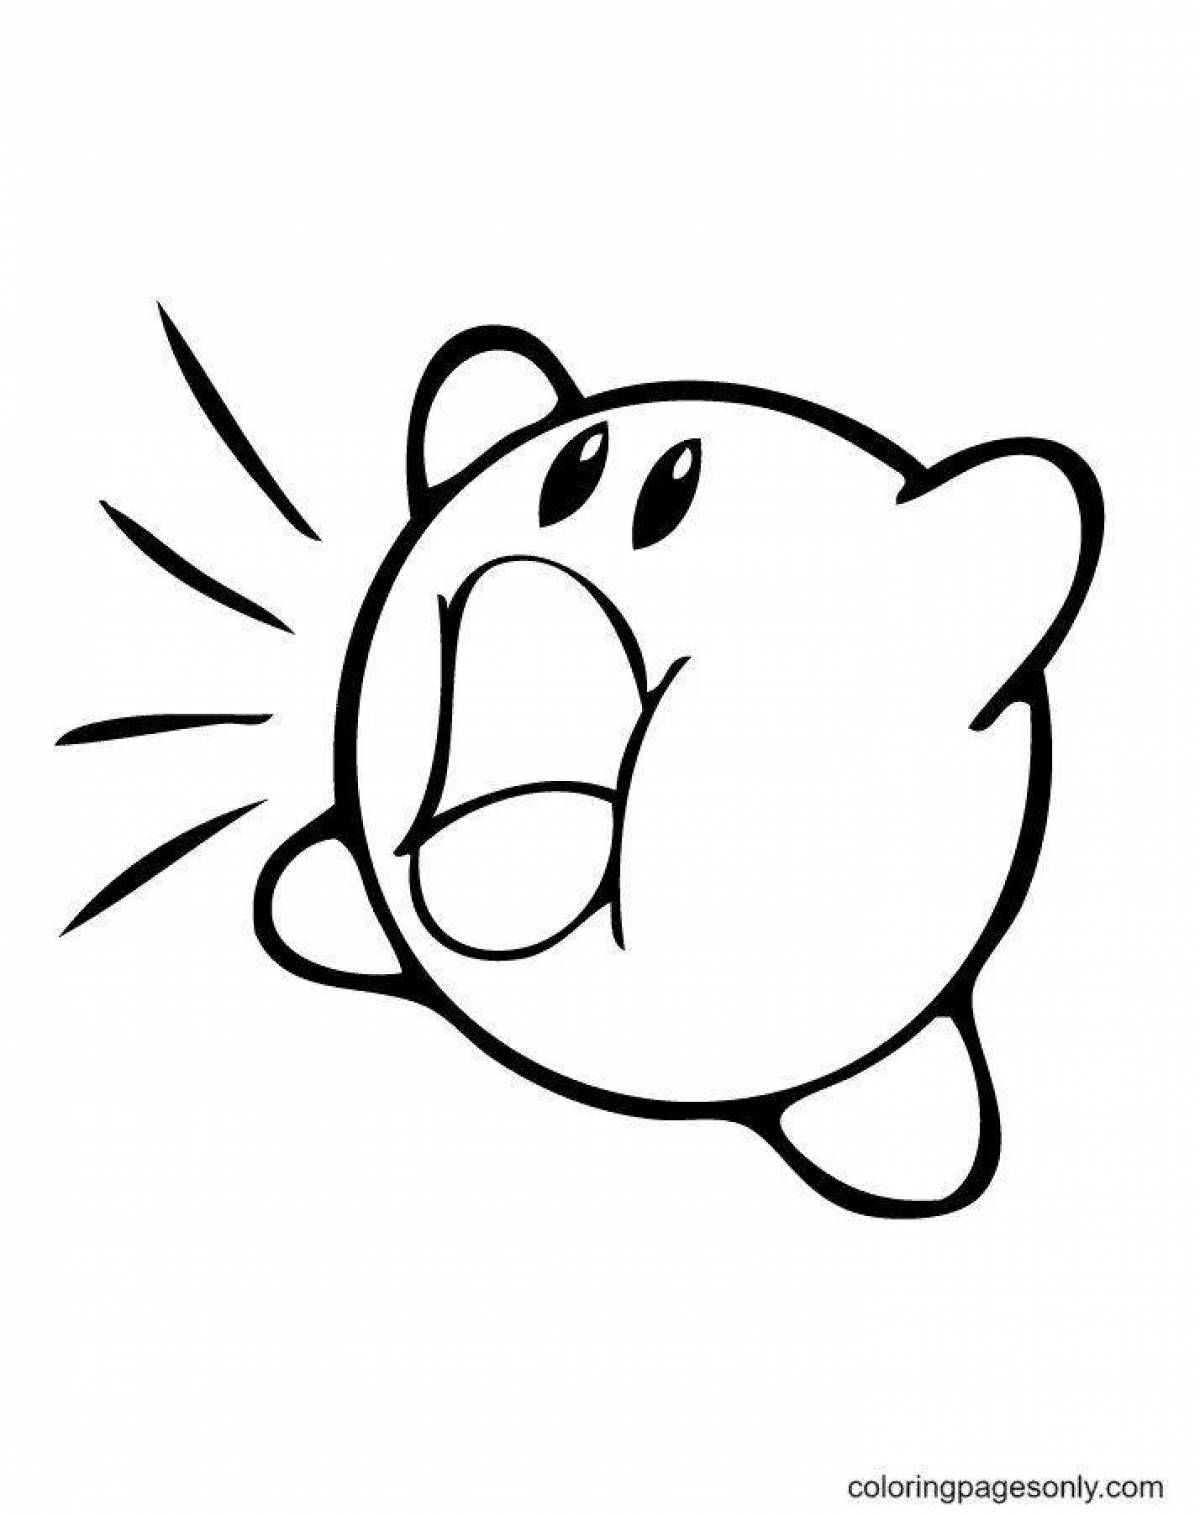 Cute kirby coloring book